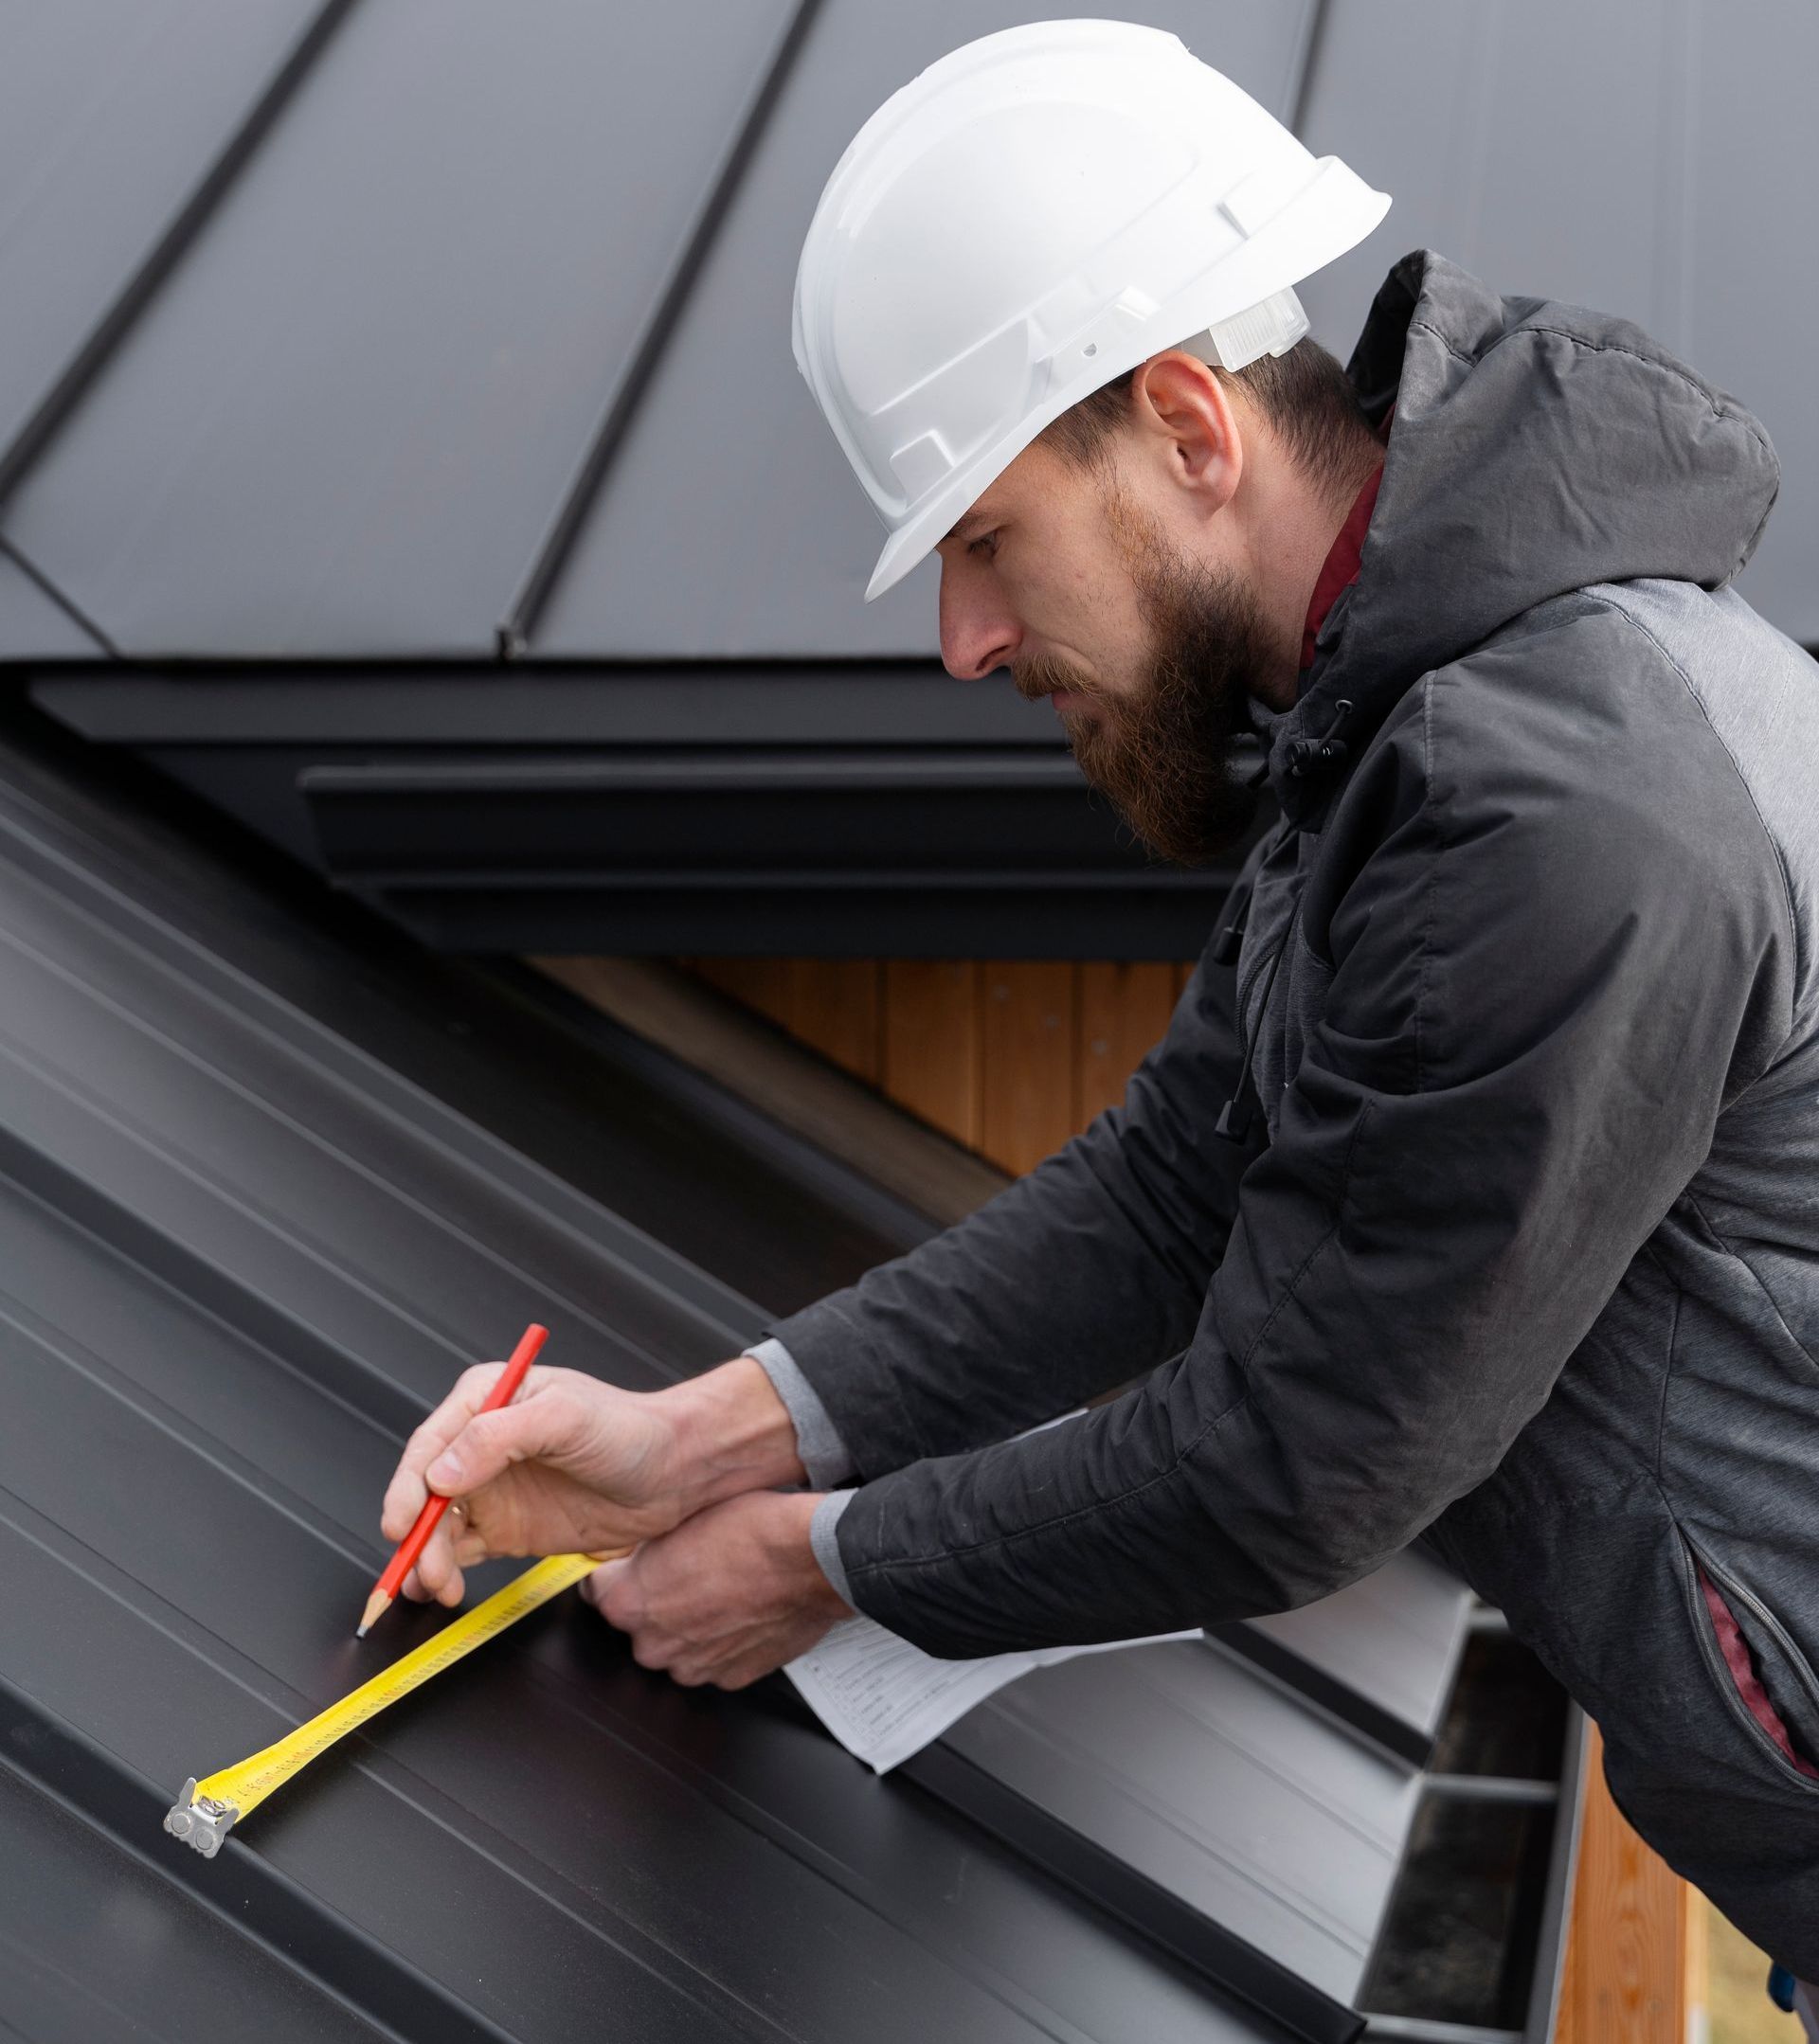 a man wearing a hard hat is measuring a roof with a tape measure